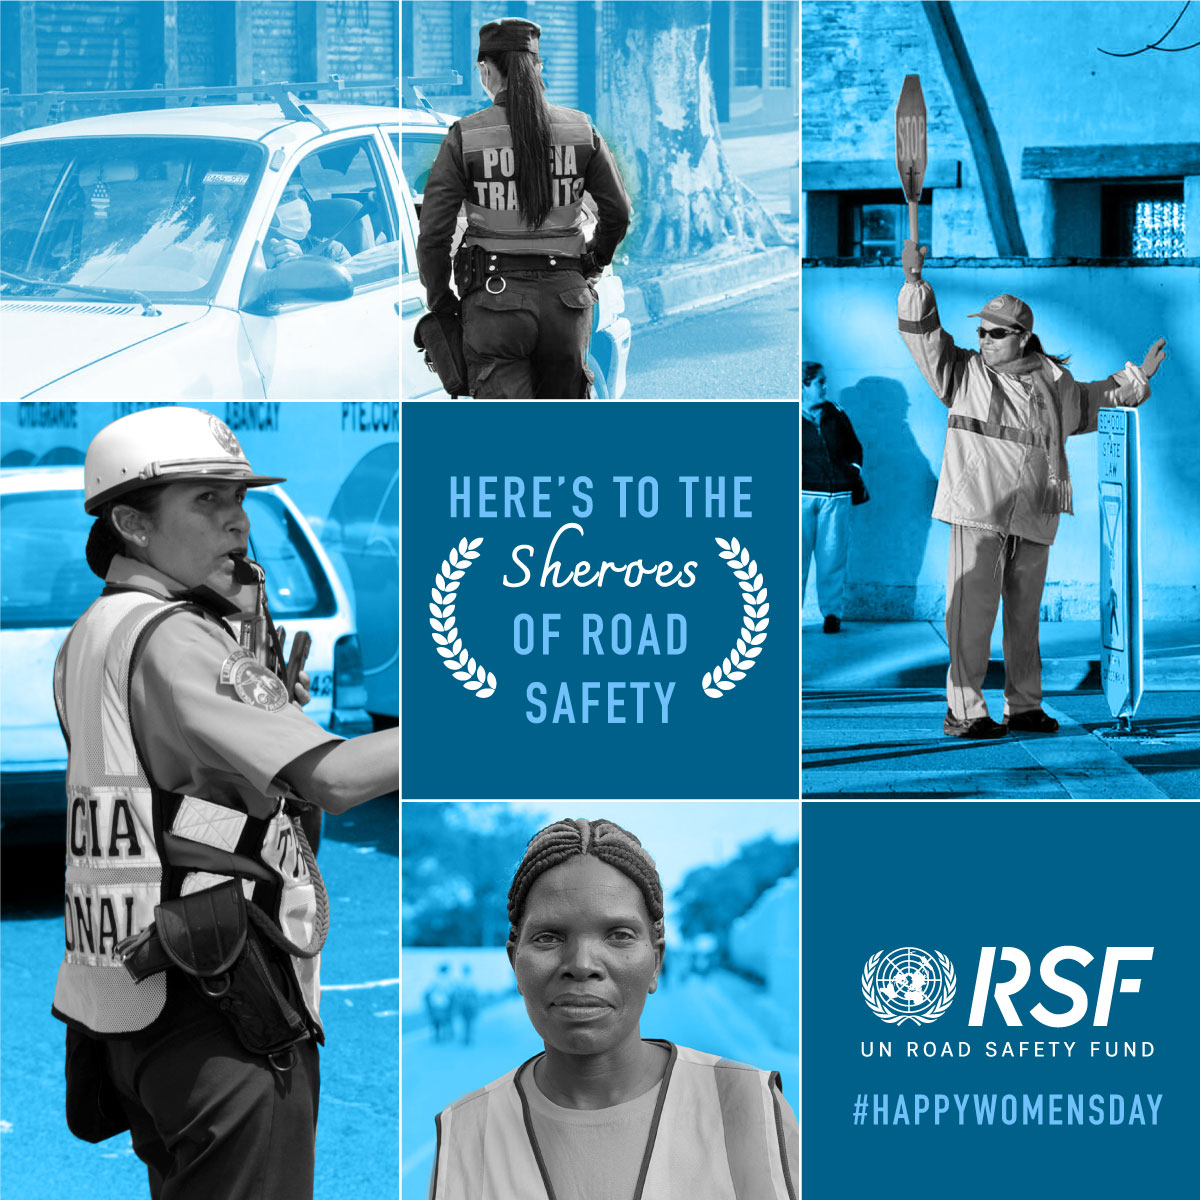 This #InternationalWomensDay, we honor the women paving the way for safer roads! 💪 From pedestrian walkways in Ethiopia to speed enforcement in Argentina, @UN_RSF supports projects that empower women & keep everyone safe.